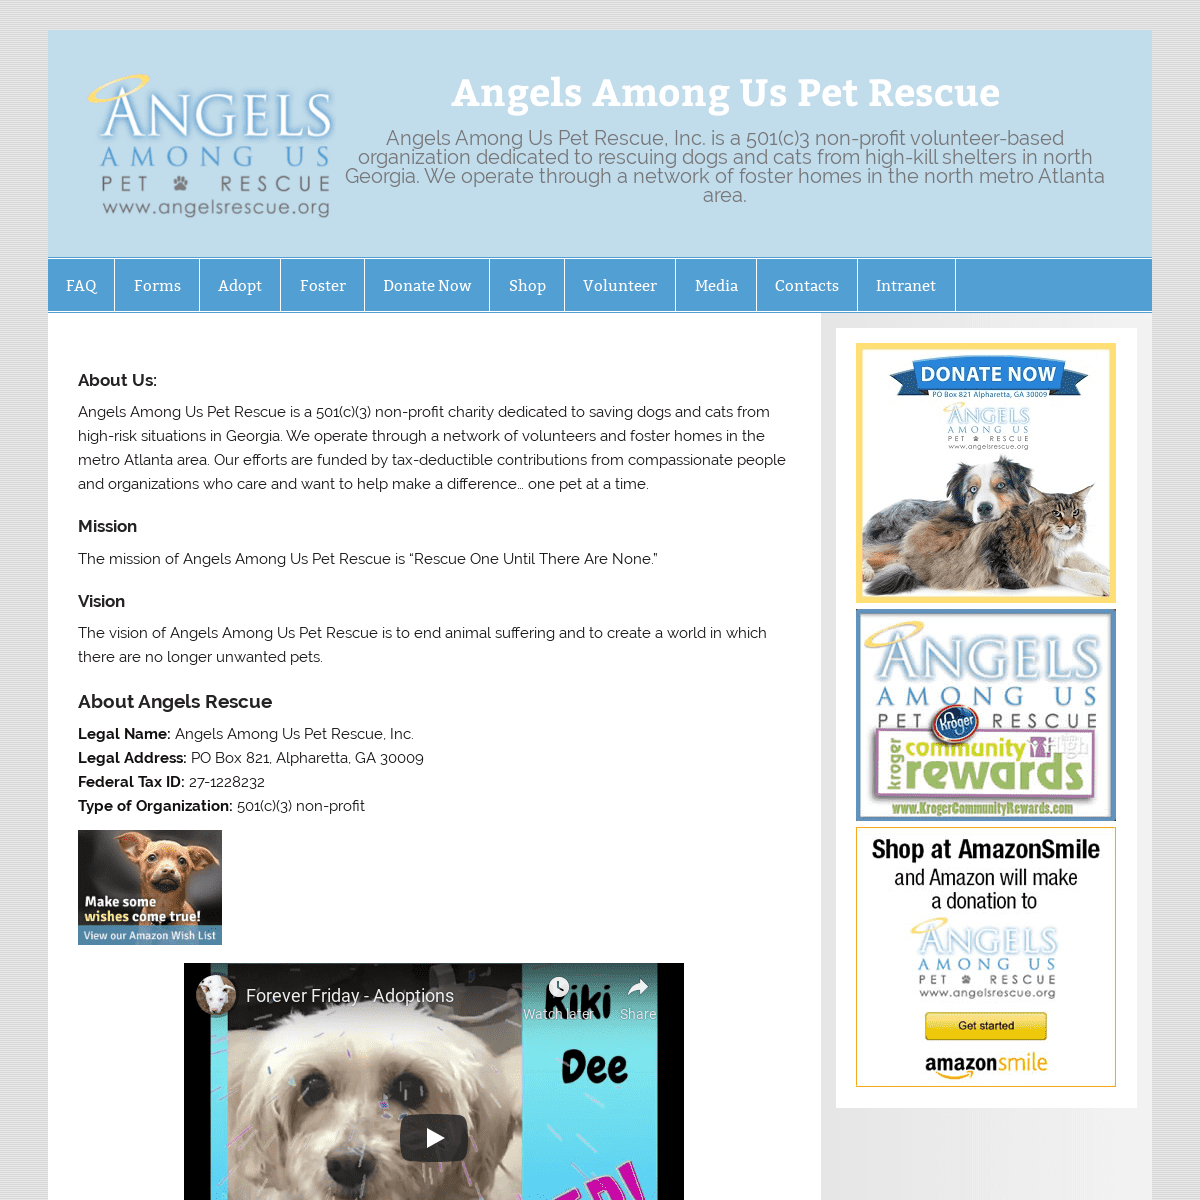 A complete backup of https://angelsrescue.org